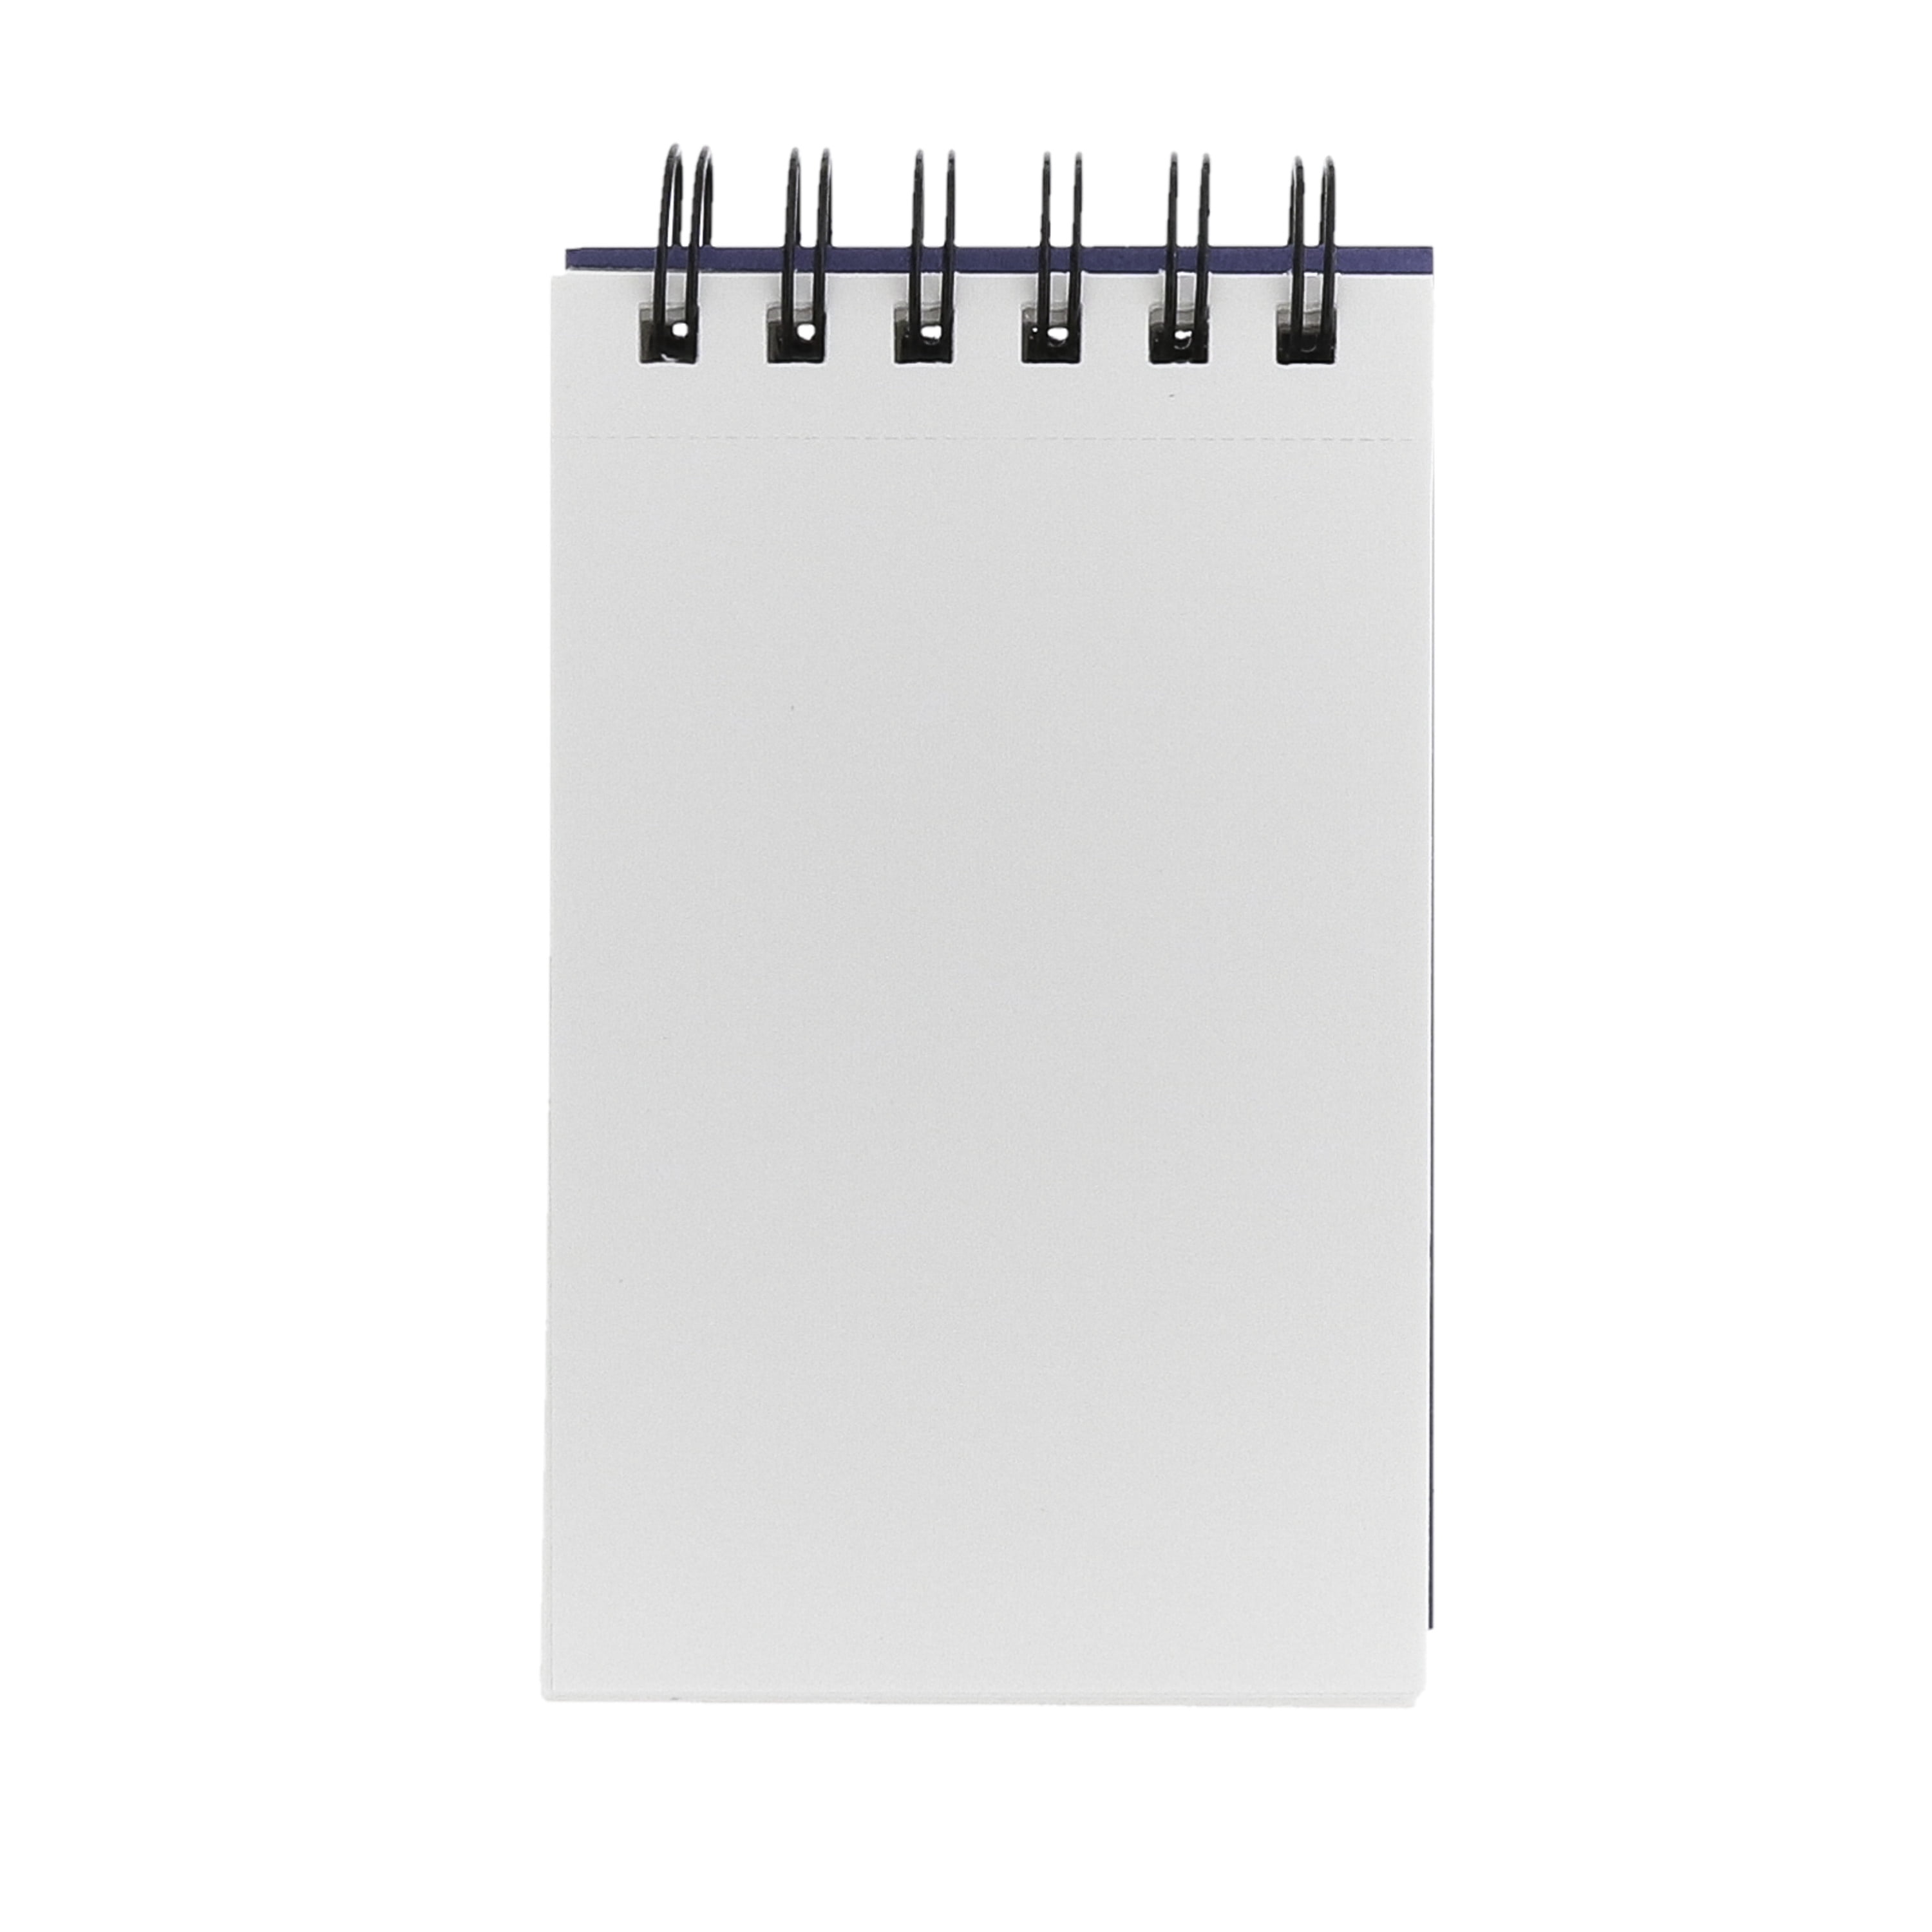 Jack Richeson 100% Sulphite Spiral Binding High Quality Sketch Pad, 60 lb, 9 x 12 in, 100 Sheets, White